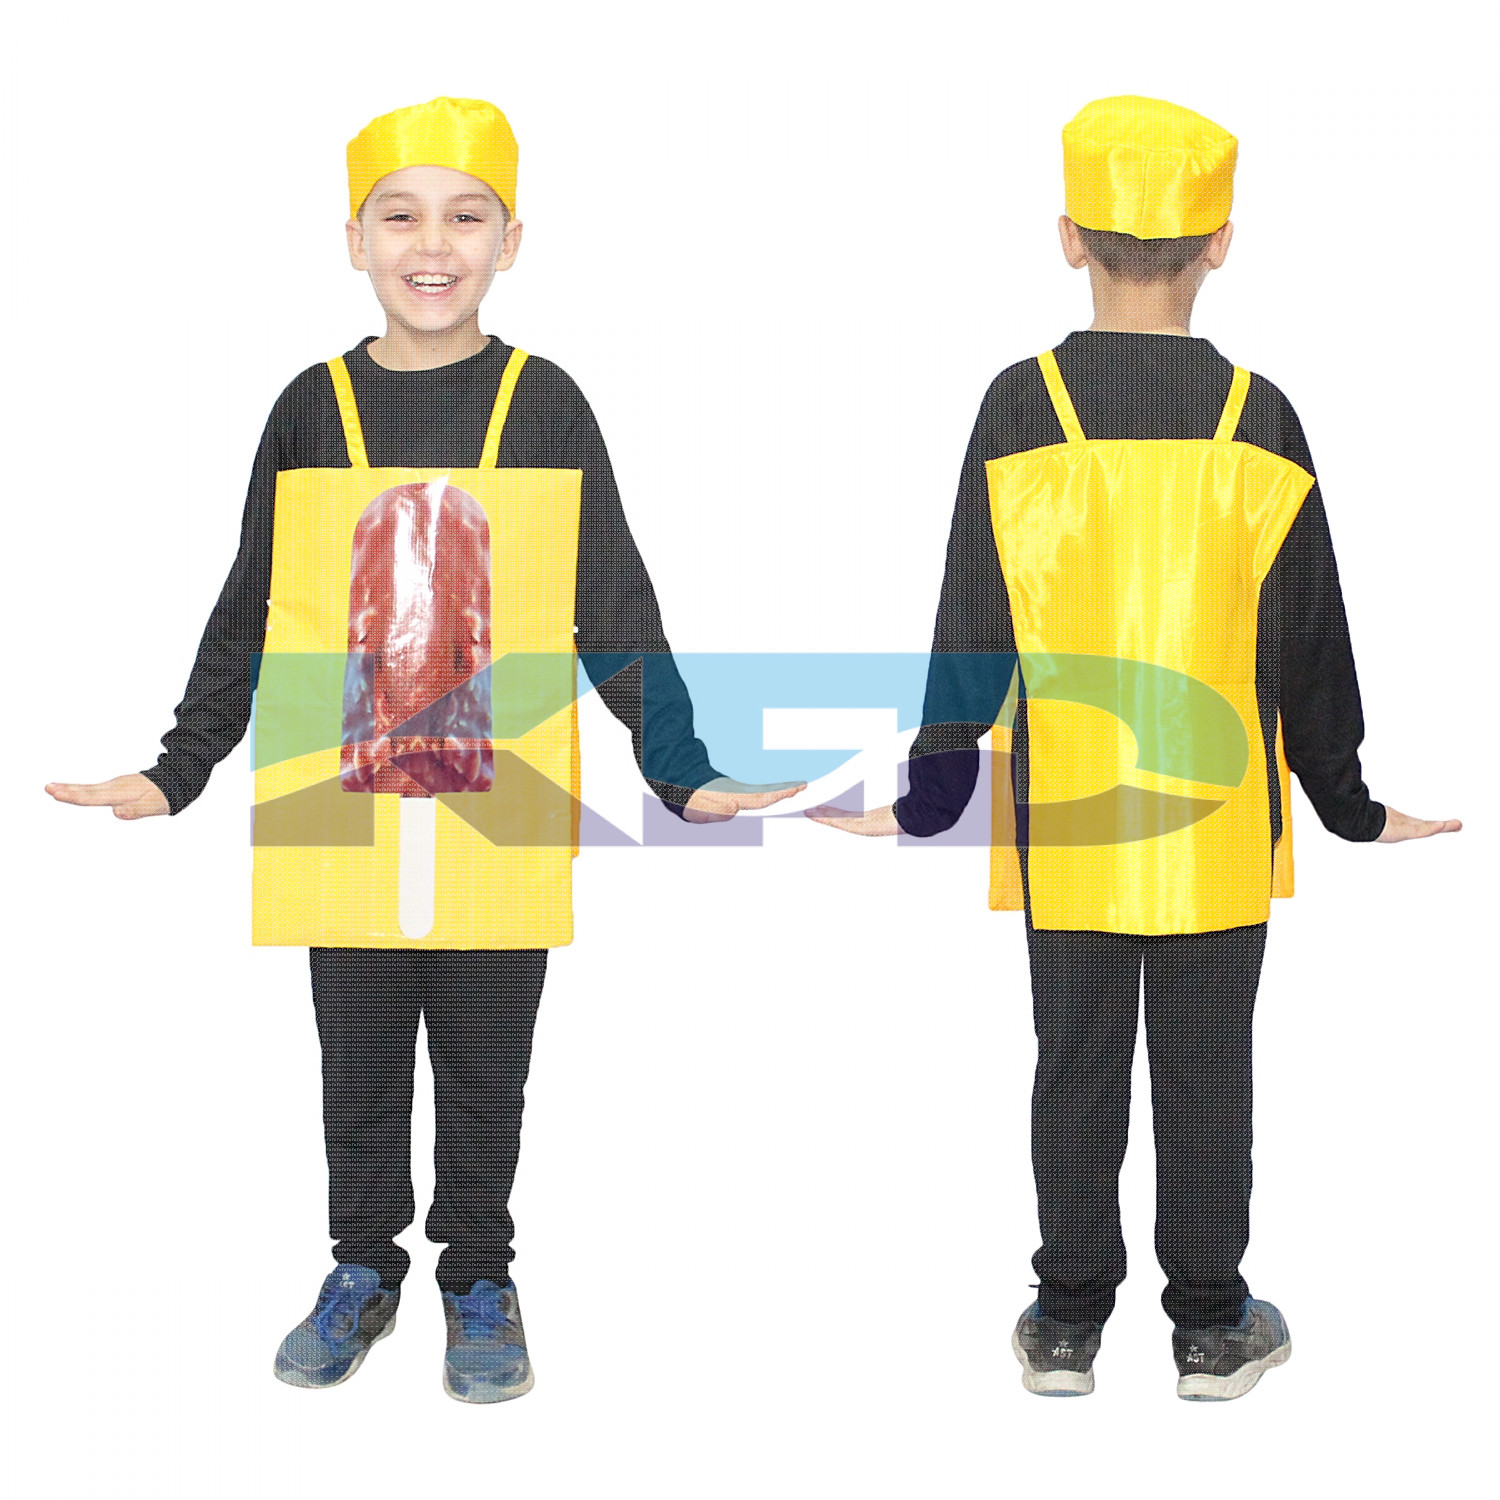 Ice Cream Fancy Dress/Chocobar Fancy Dress/Chocolate Fancy Dress/Junk Food Costume/For Kids Annual function/Theme Party/Competition/Stage Shows/Birthday Party Dress